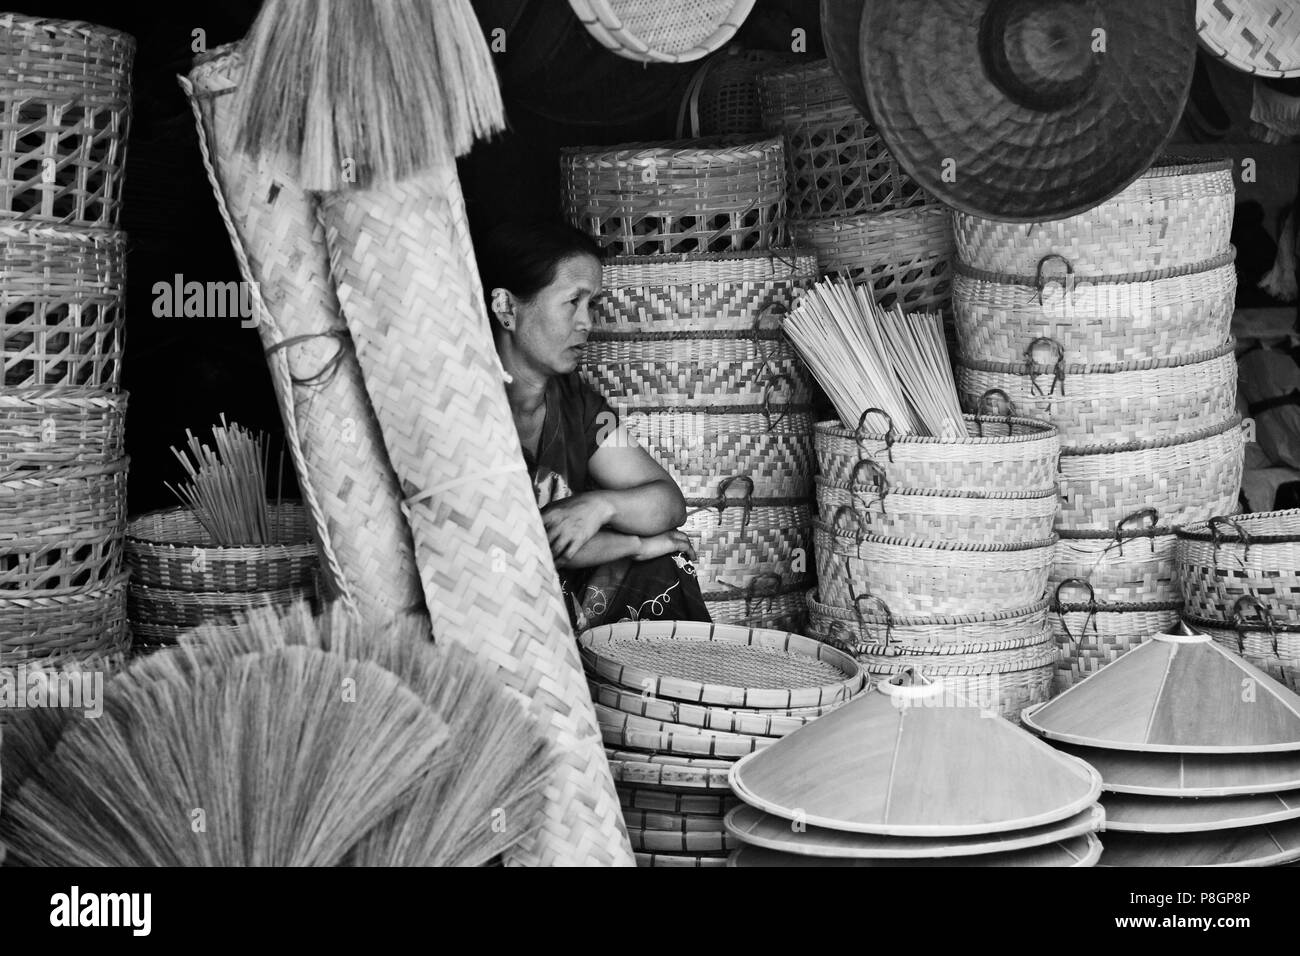 BAMBOO BROOMS, HATS and BASKETS are sold at the CENTRAL MARKET in KENGTUNG also known as  KYAINGTONG - MYANMAR Stock Photo